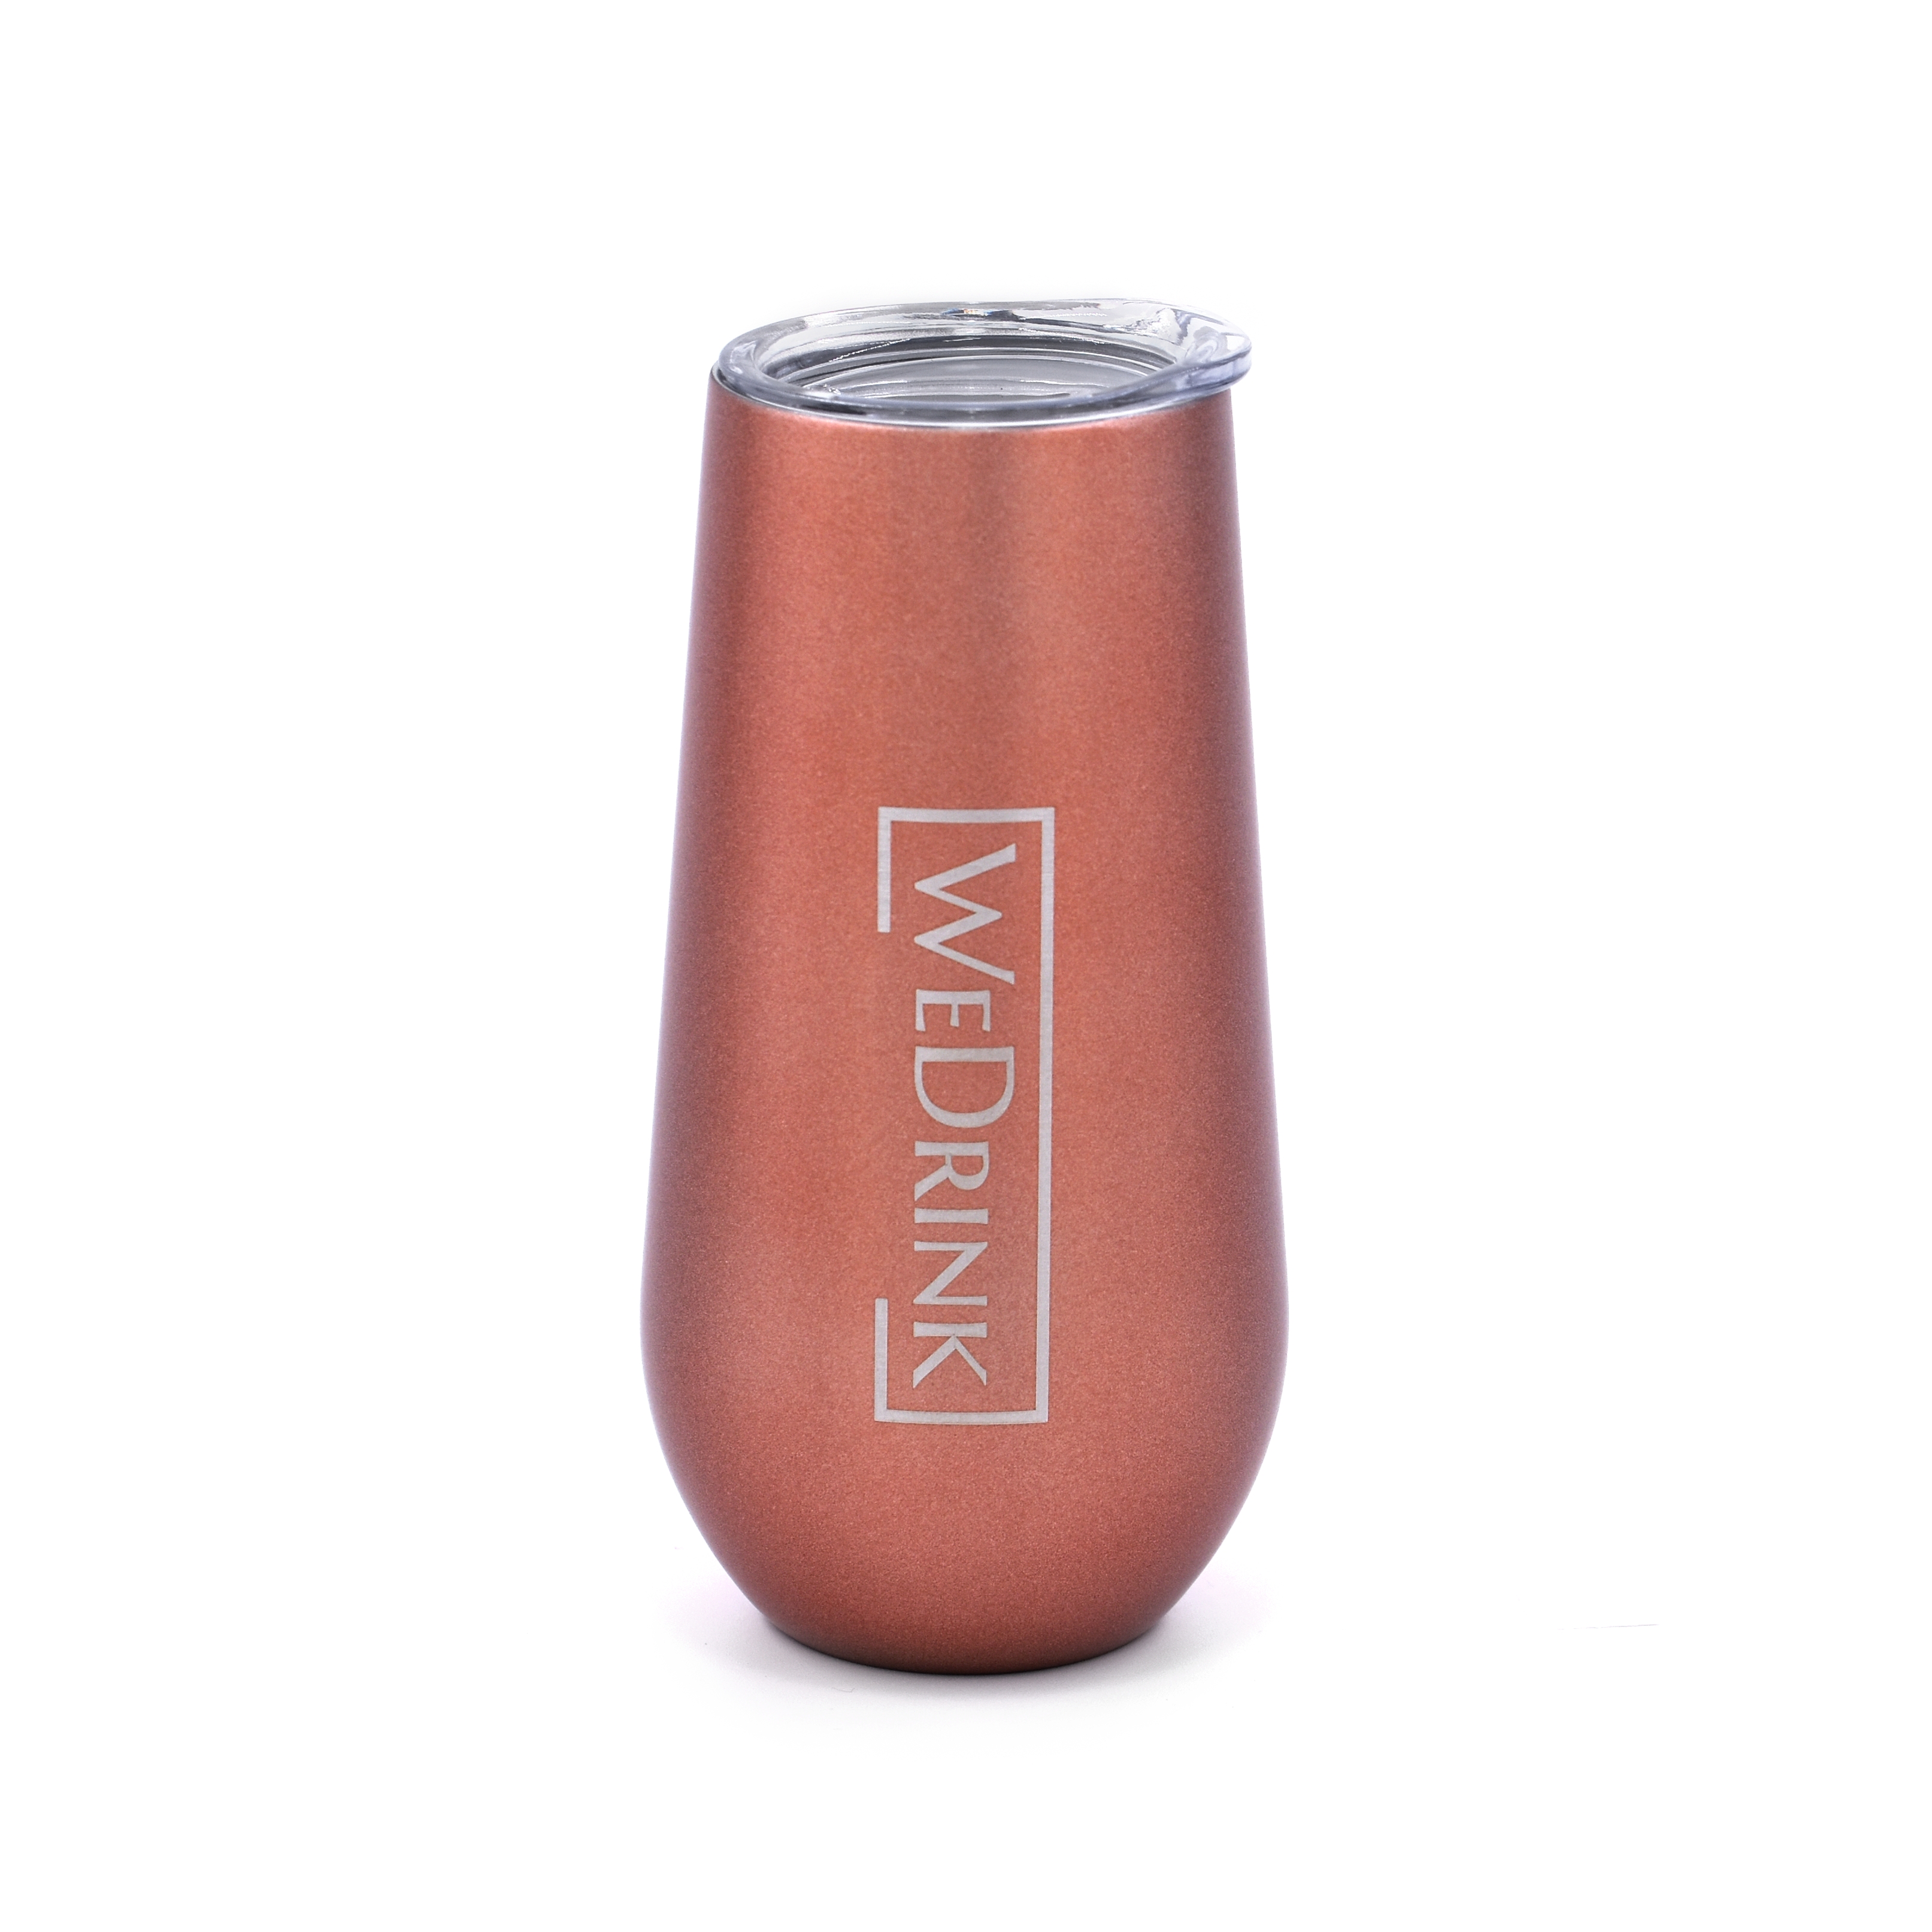 WEDRINK Mimosa cup 150 ml Rose Gold (WD-MC-04G)